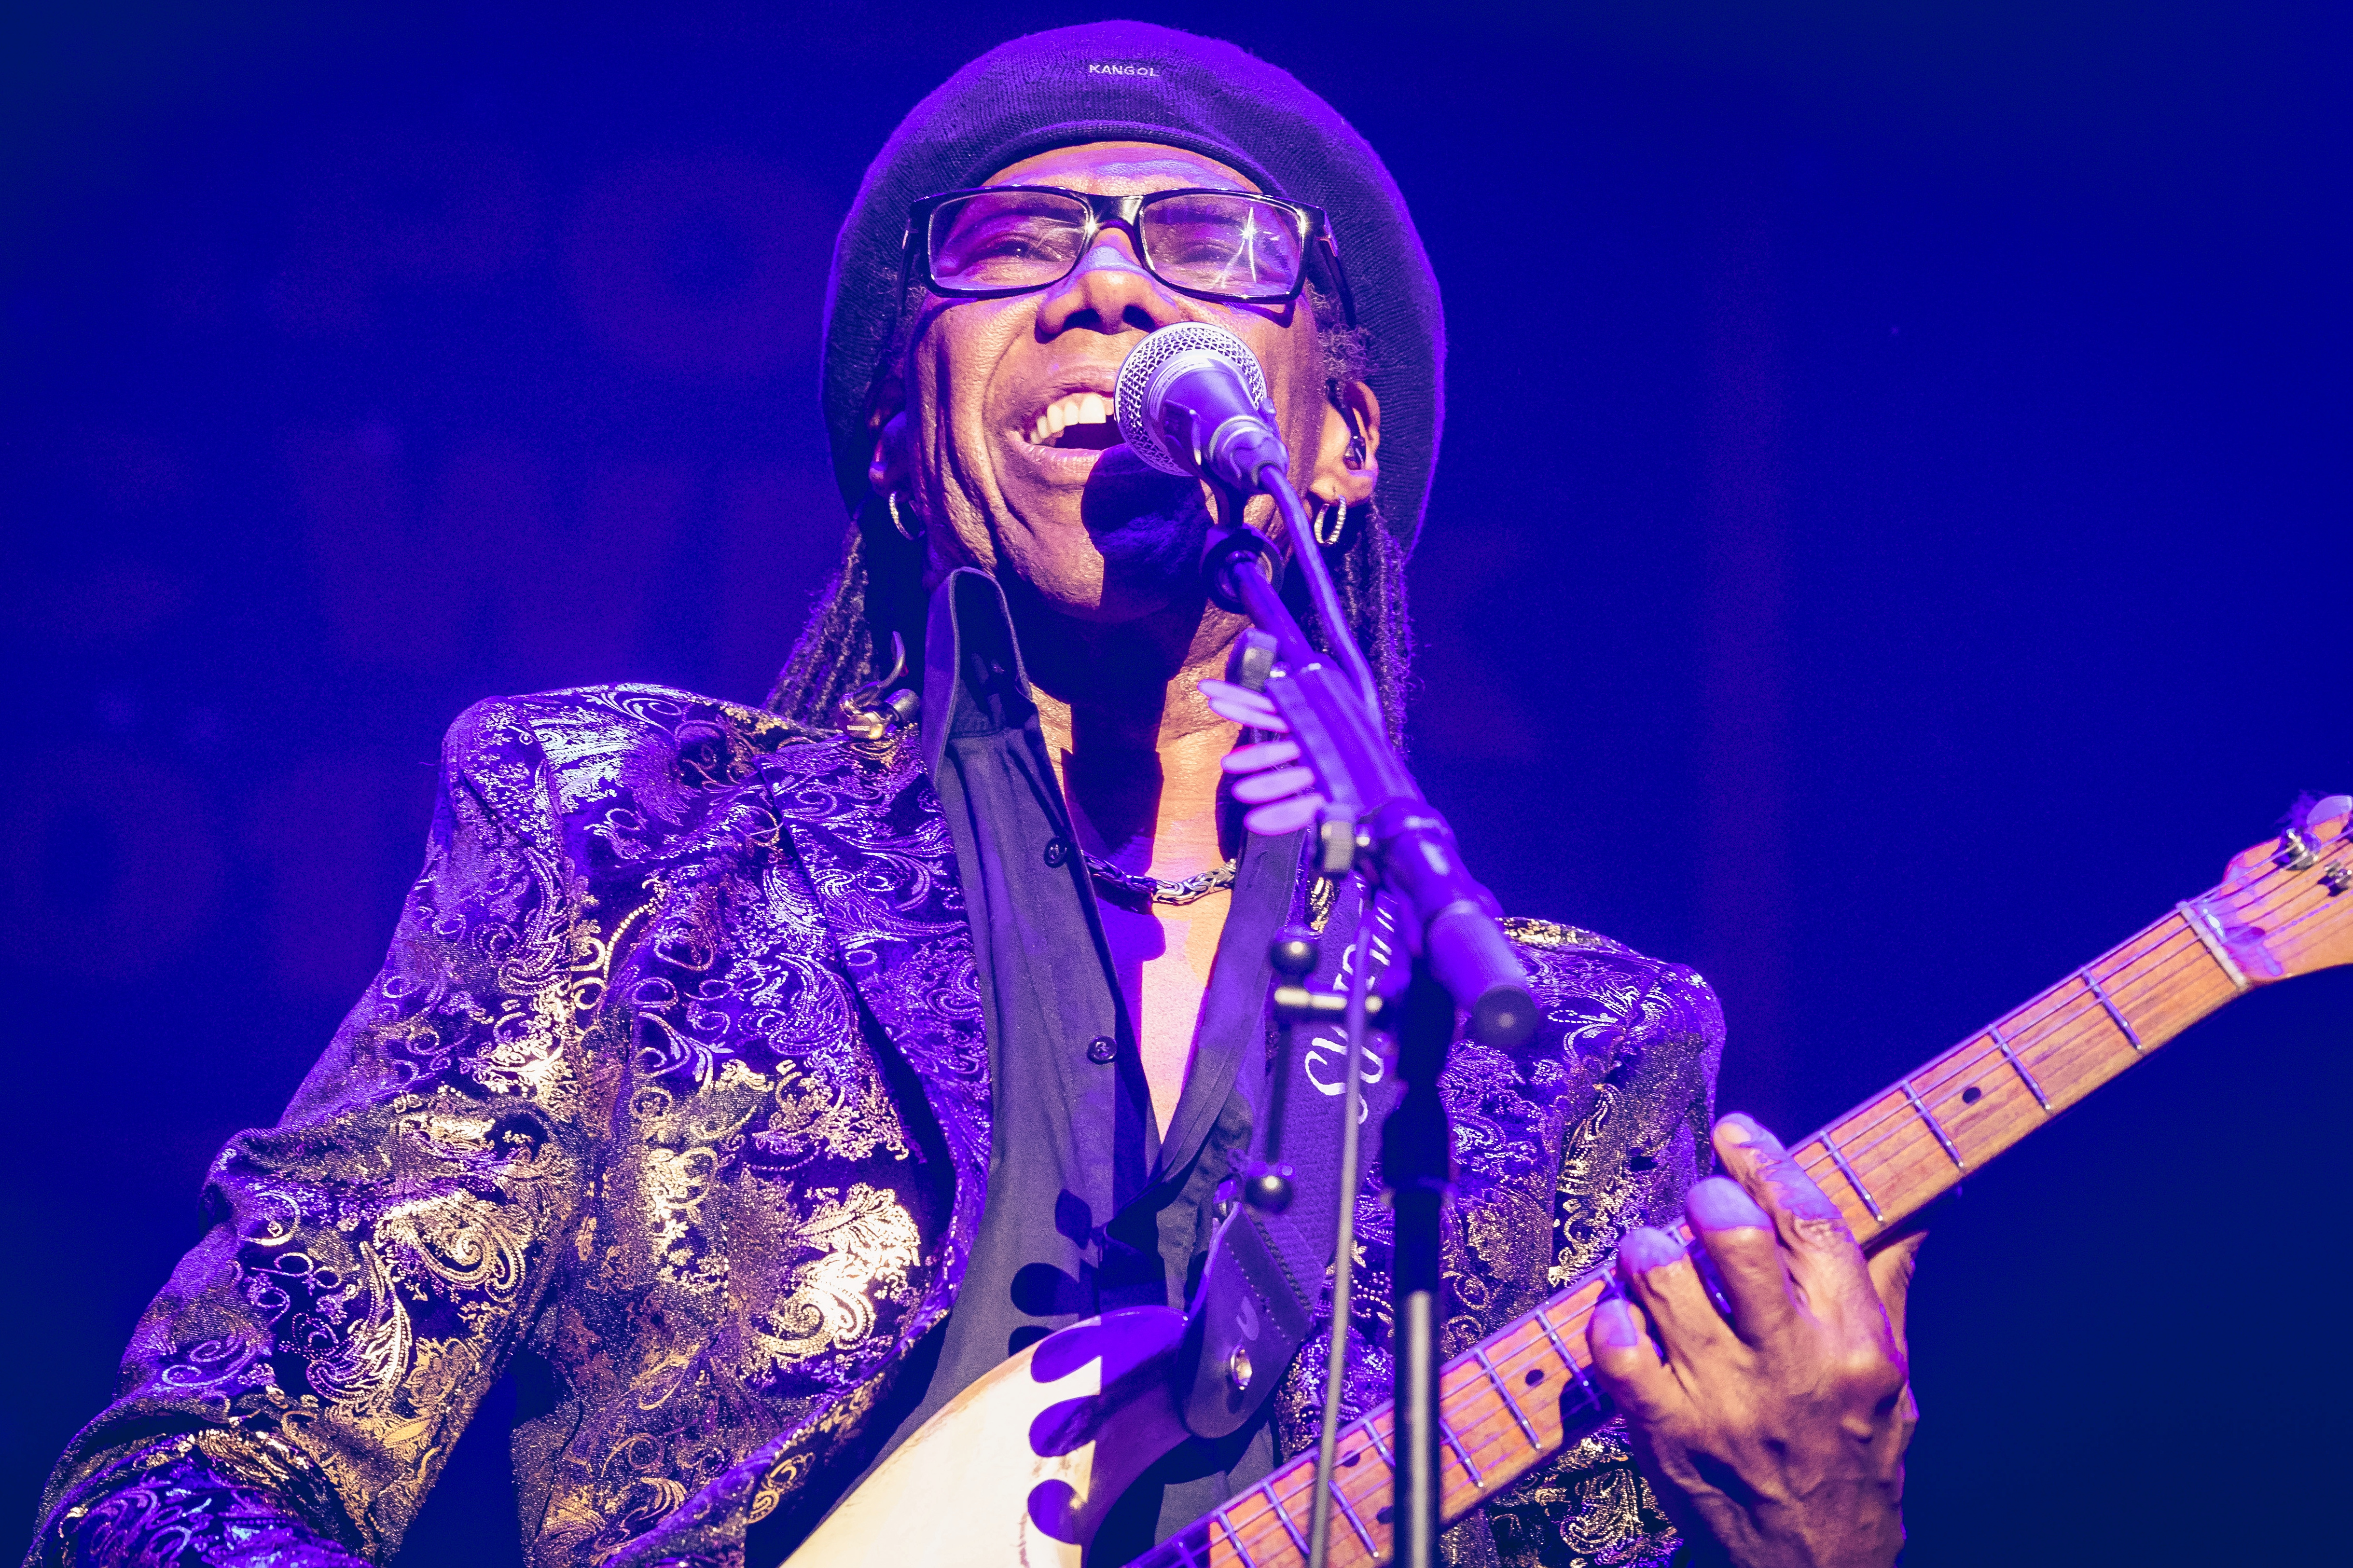 Liverpool Music Week – Chic ft Nile Rodgers – Review